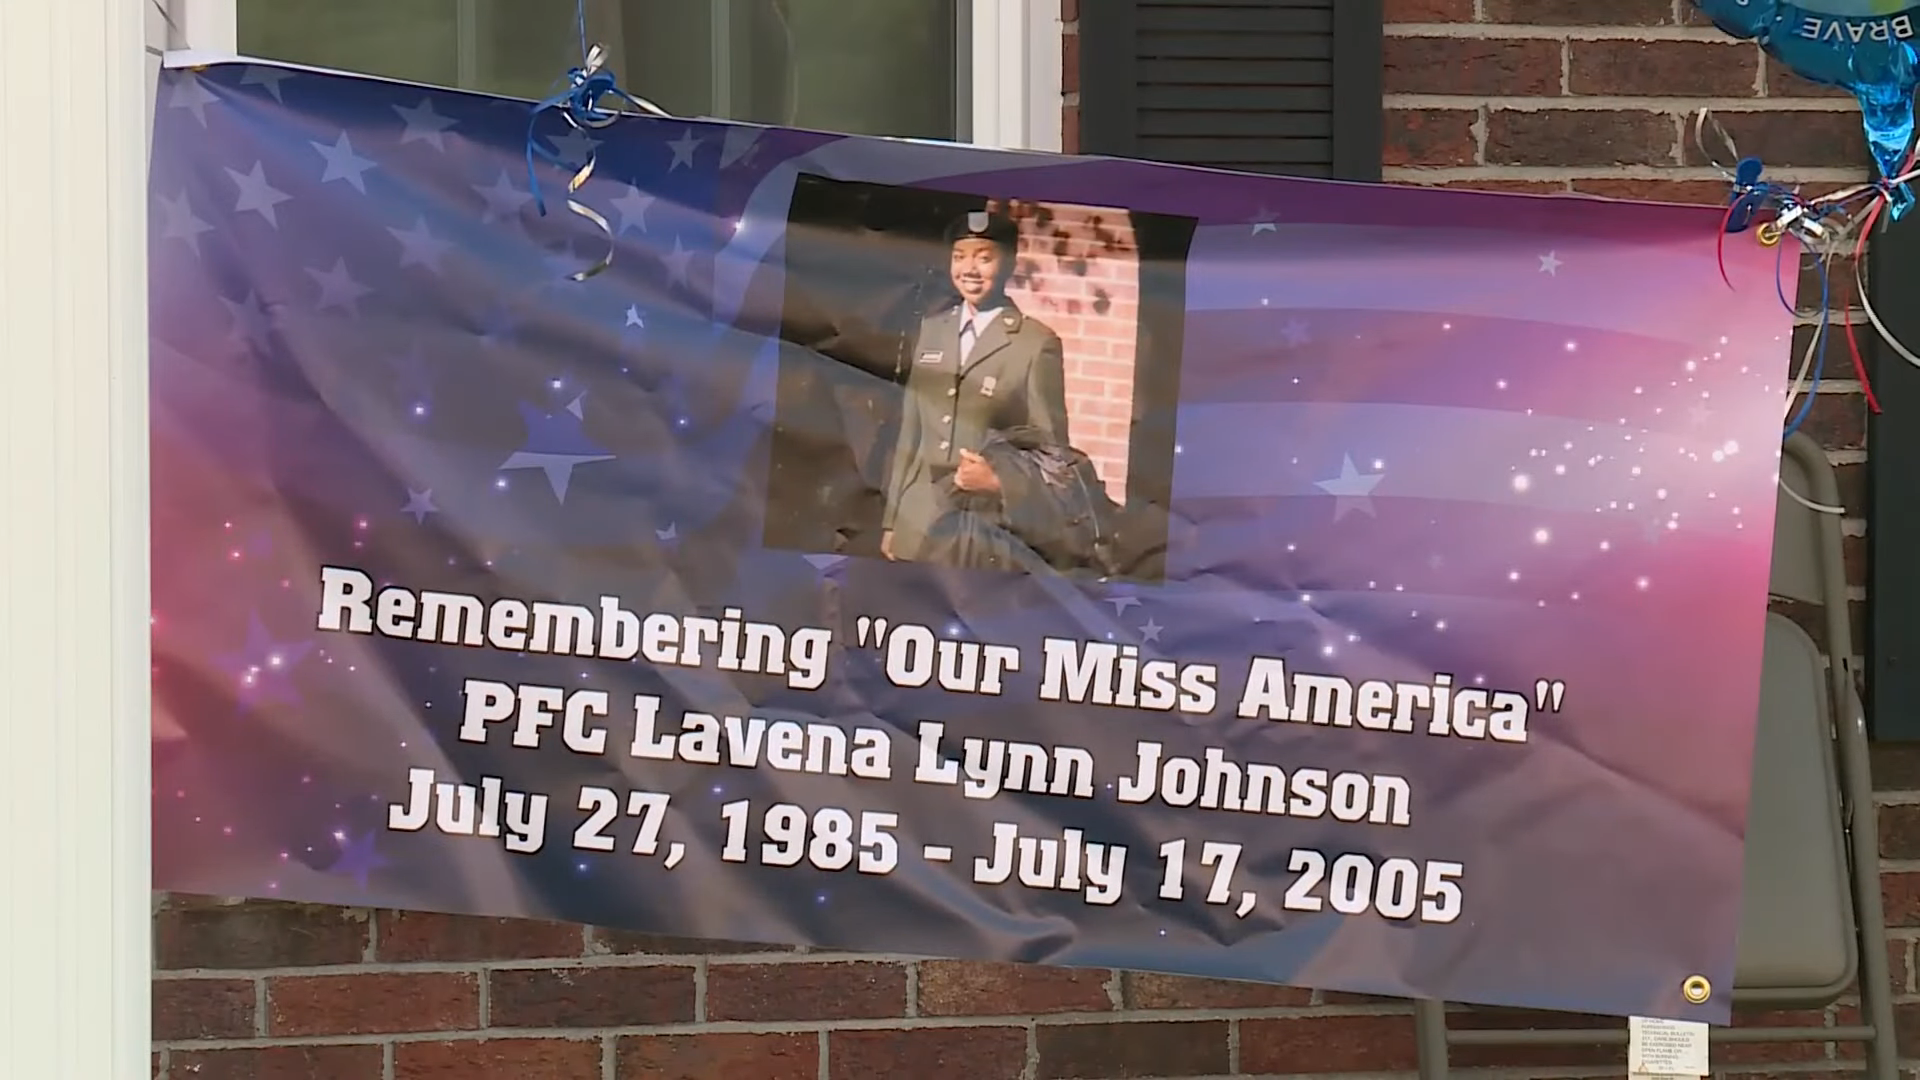 banner made in remembrance of her